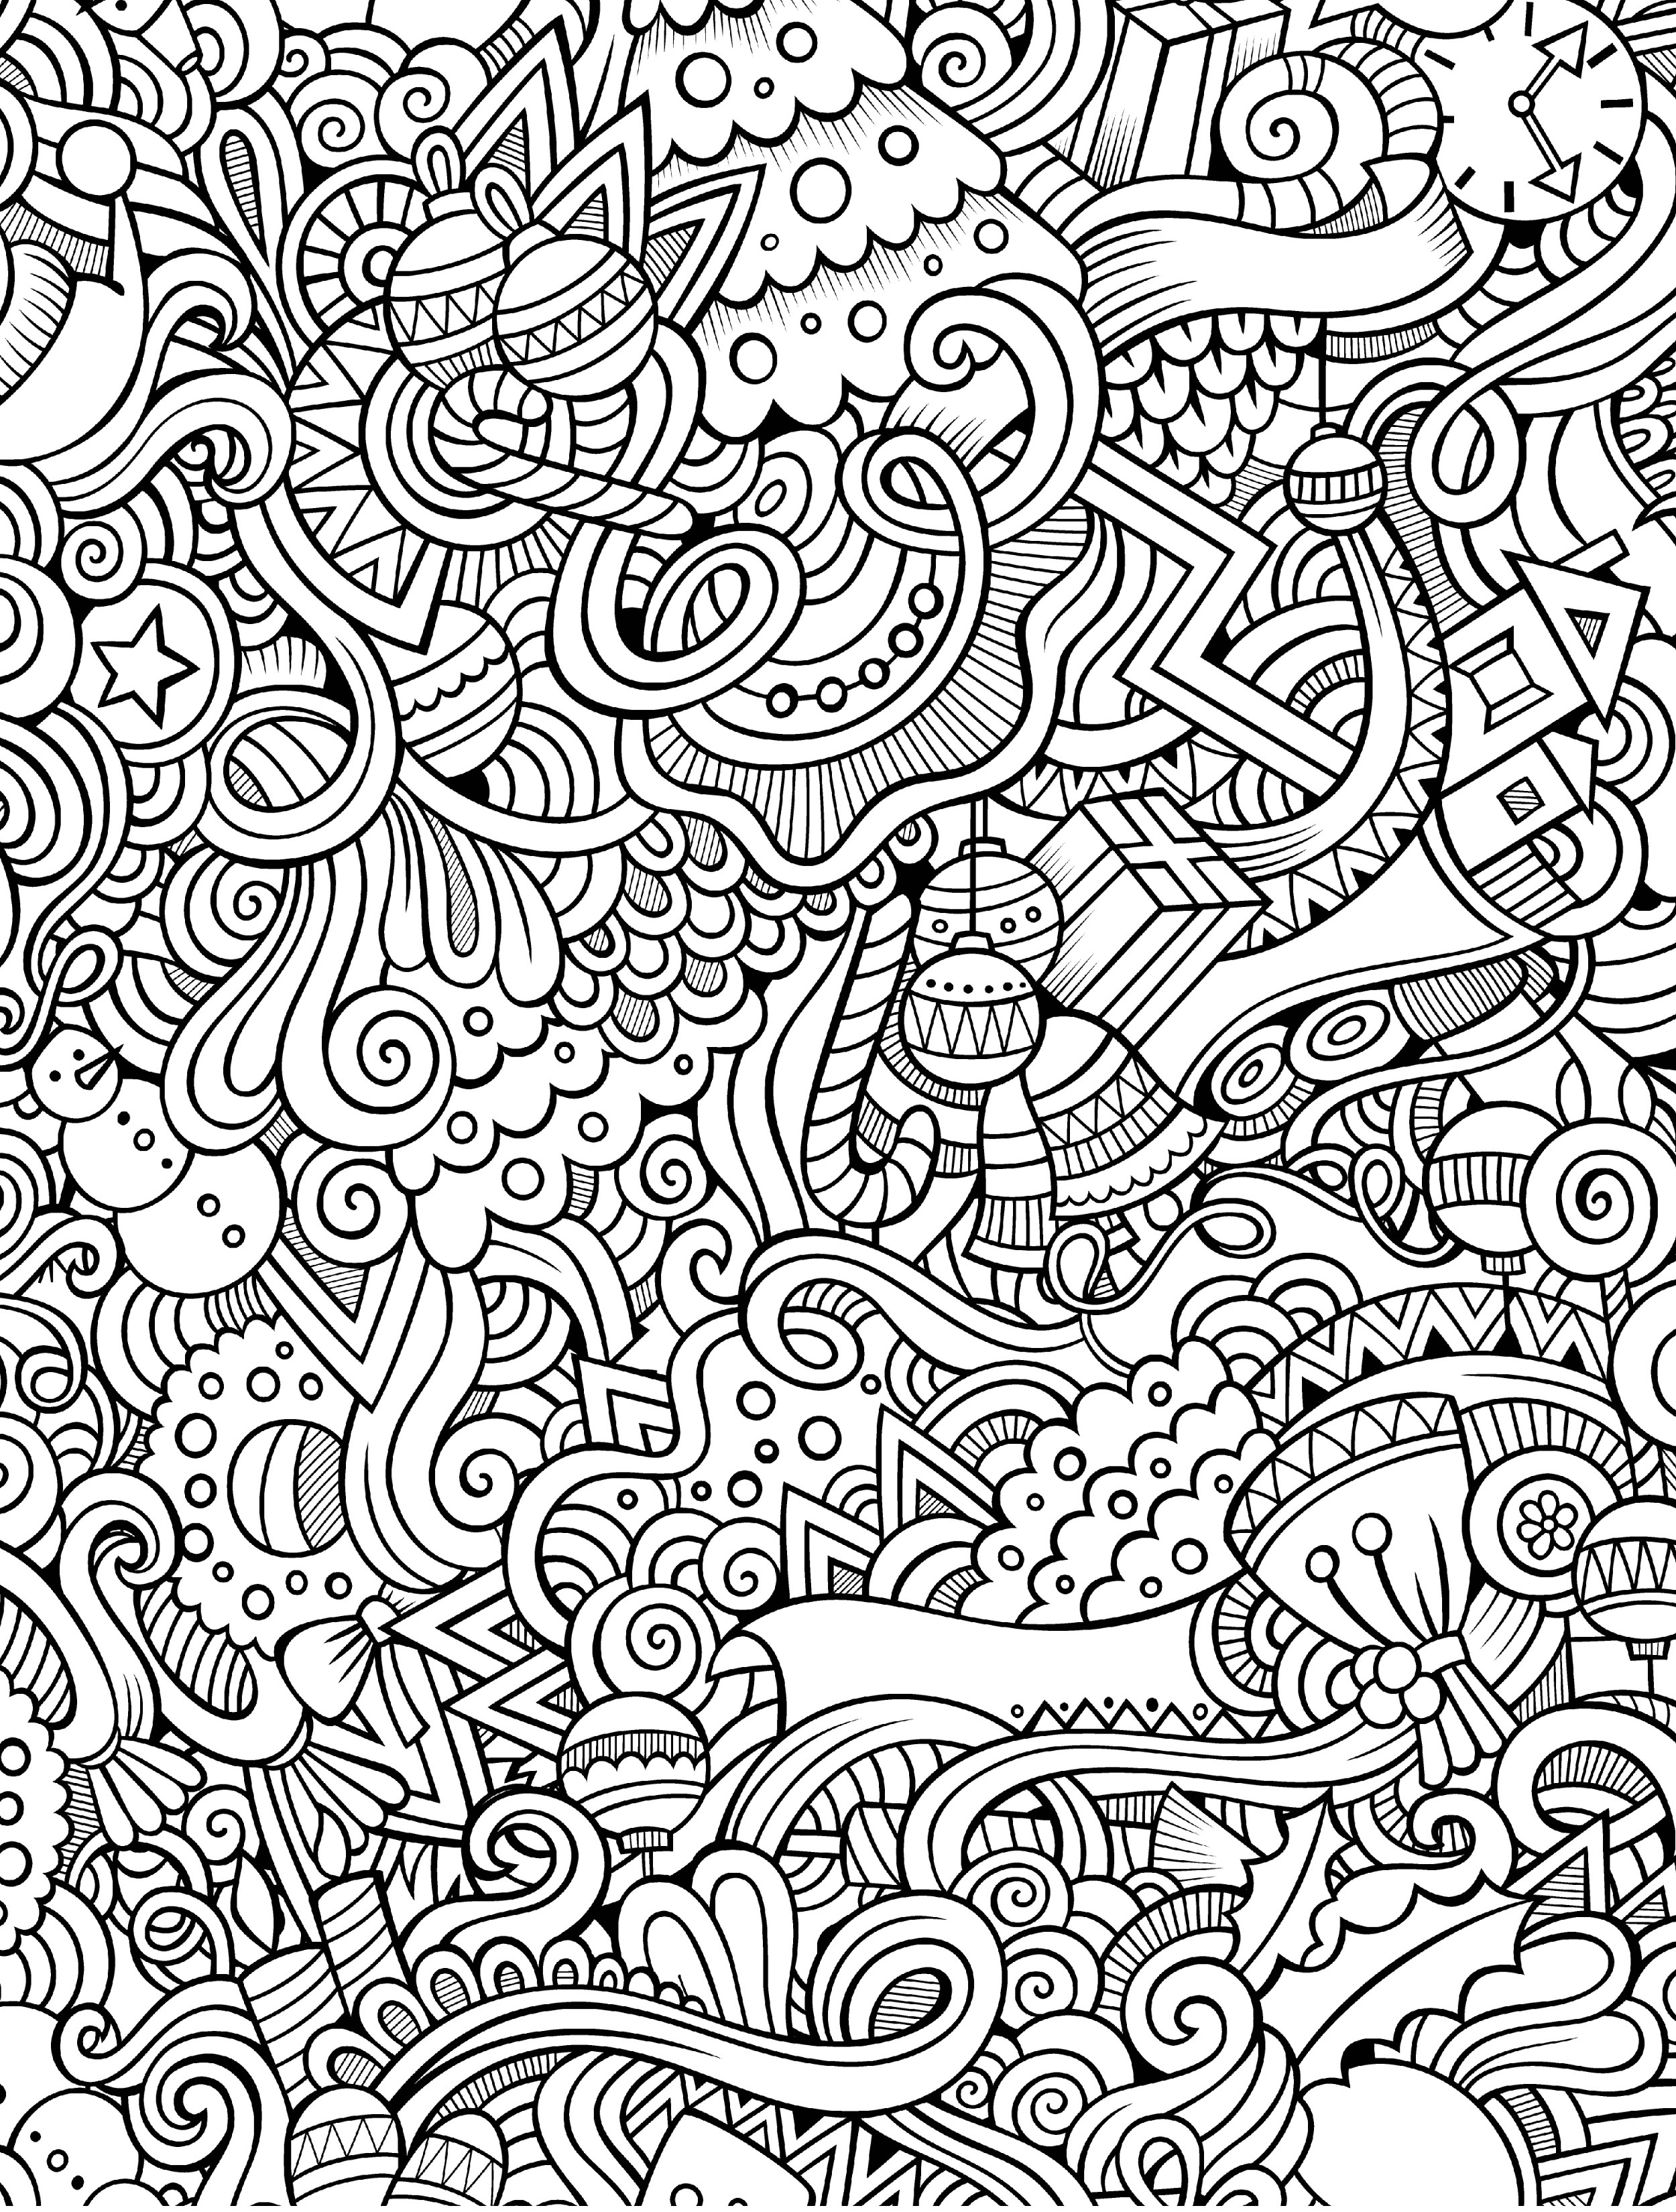 10 Free Printable Holiday Adult Coloring Pages - Www Free Printable Coloring Pages